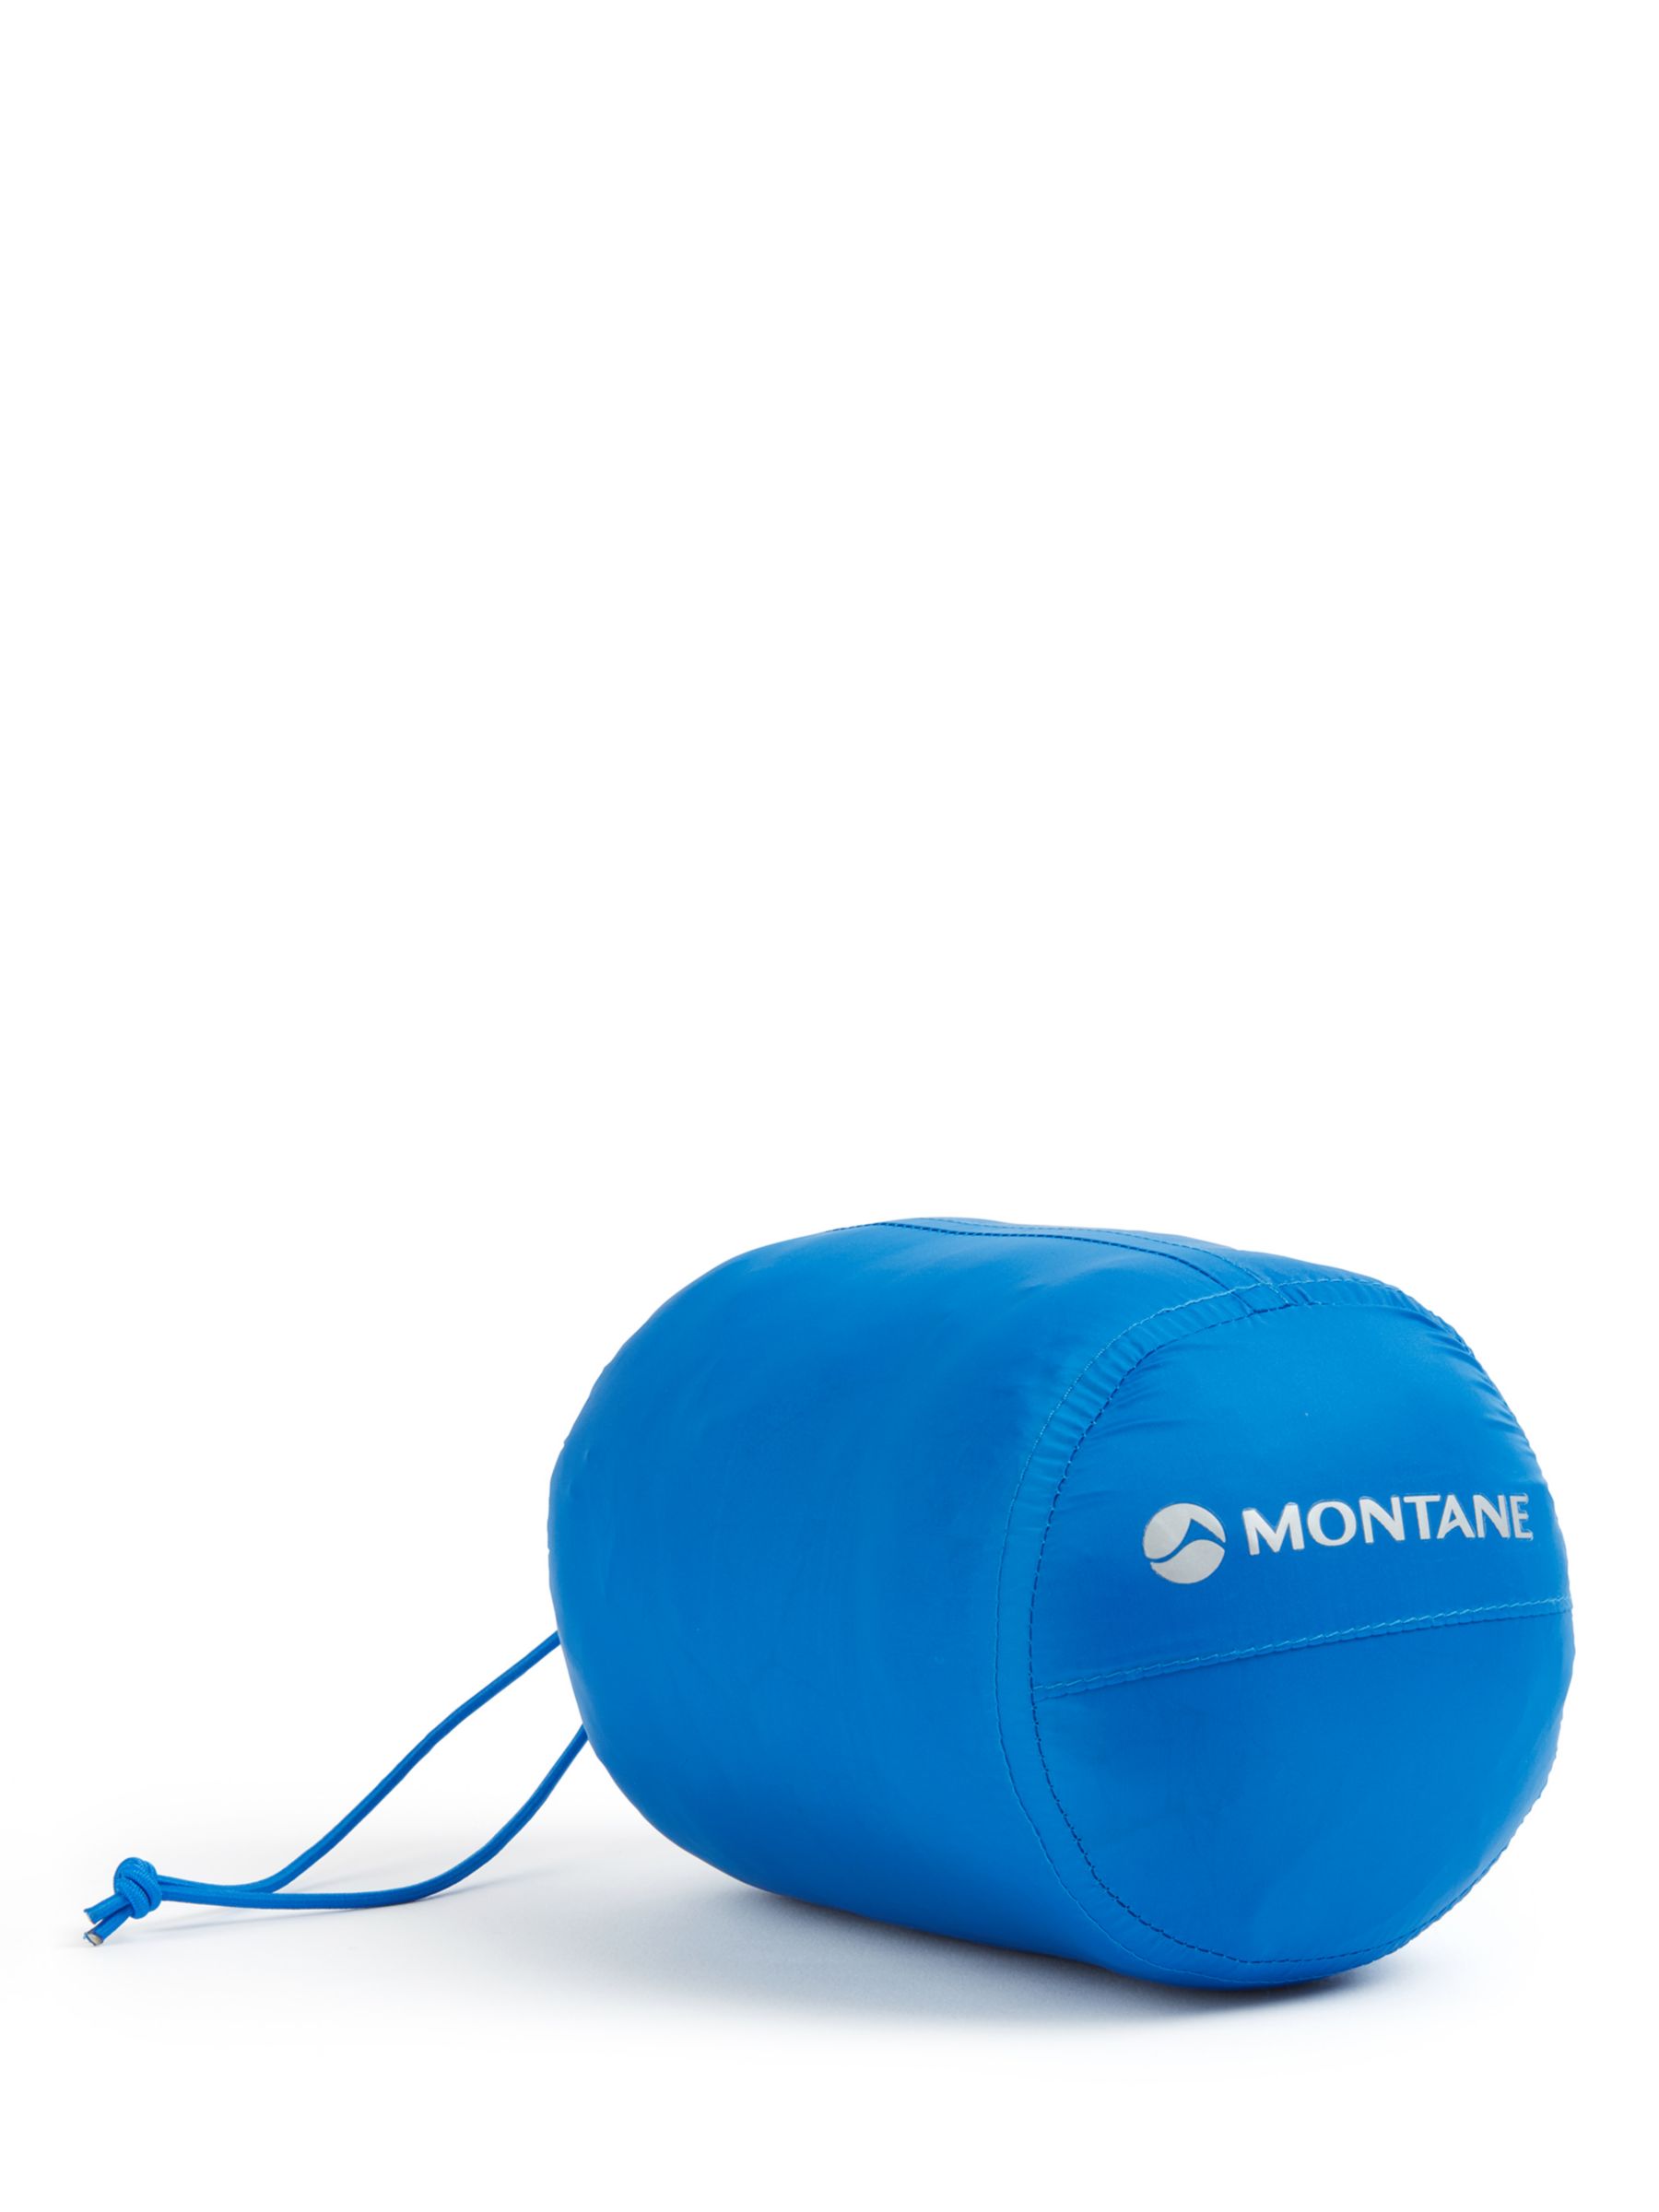 Montane Anti-Freeze Lite Hooded Packable Down Jacket, Electric Blue, S